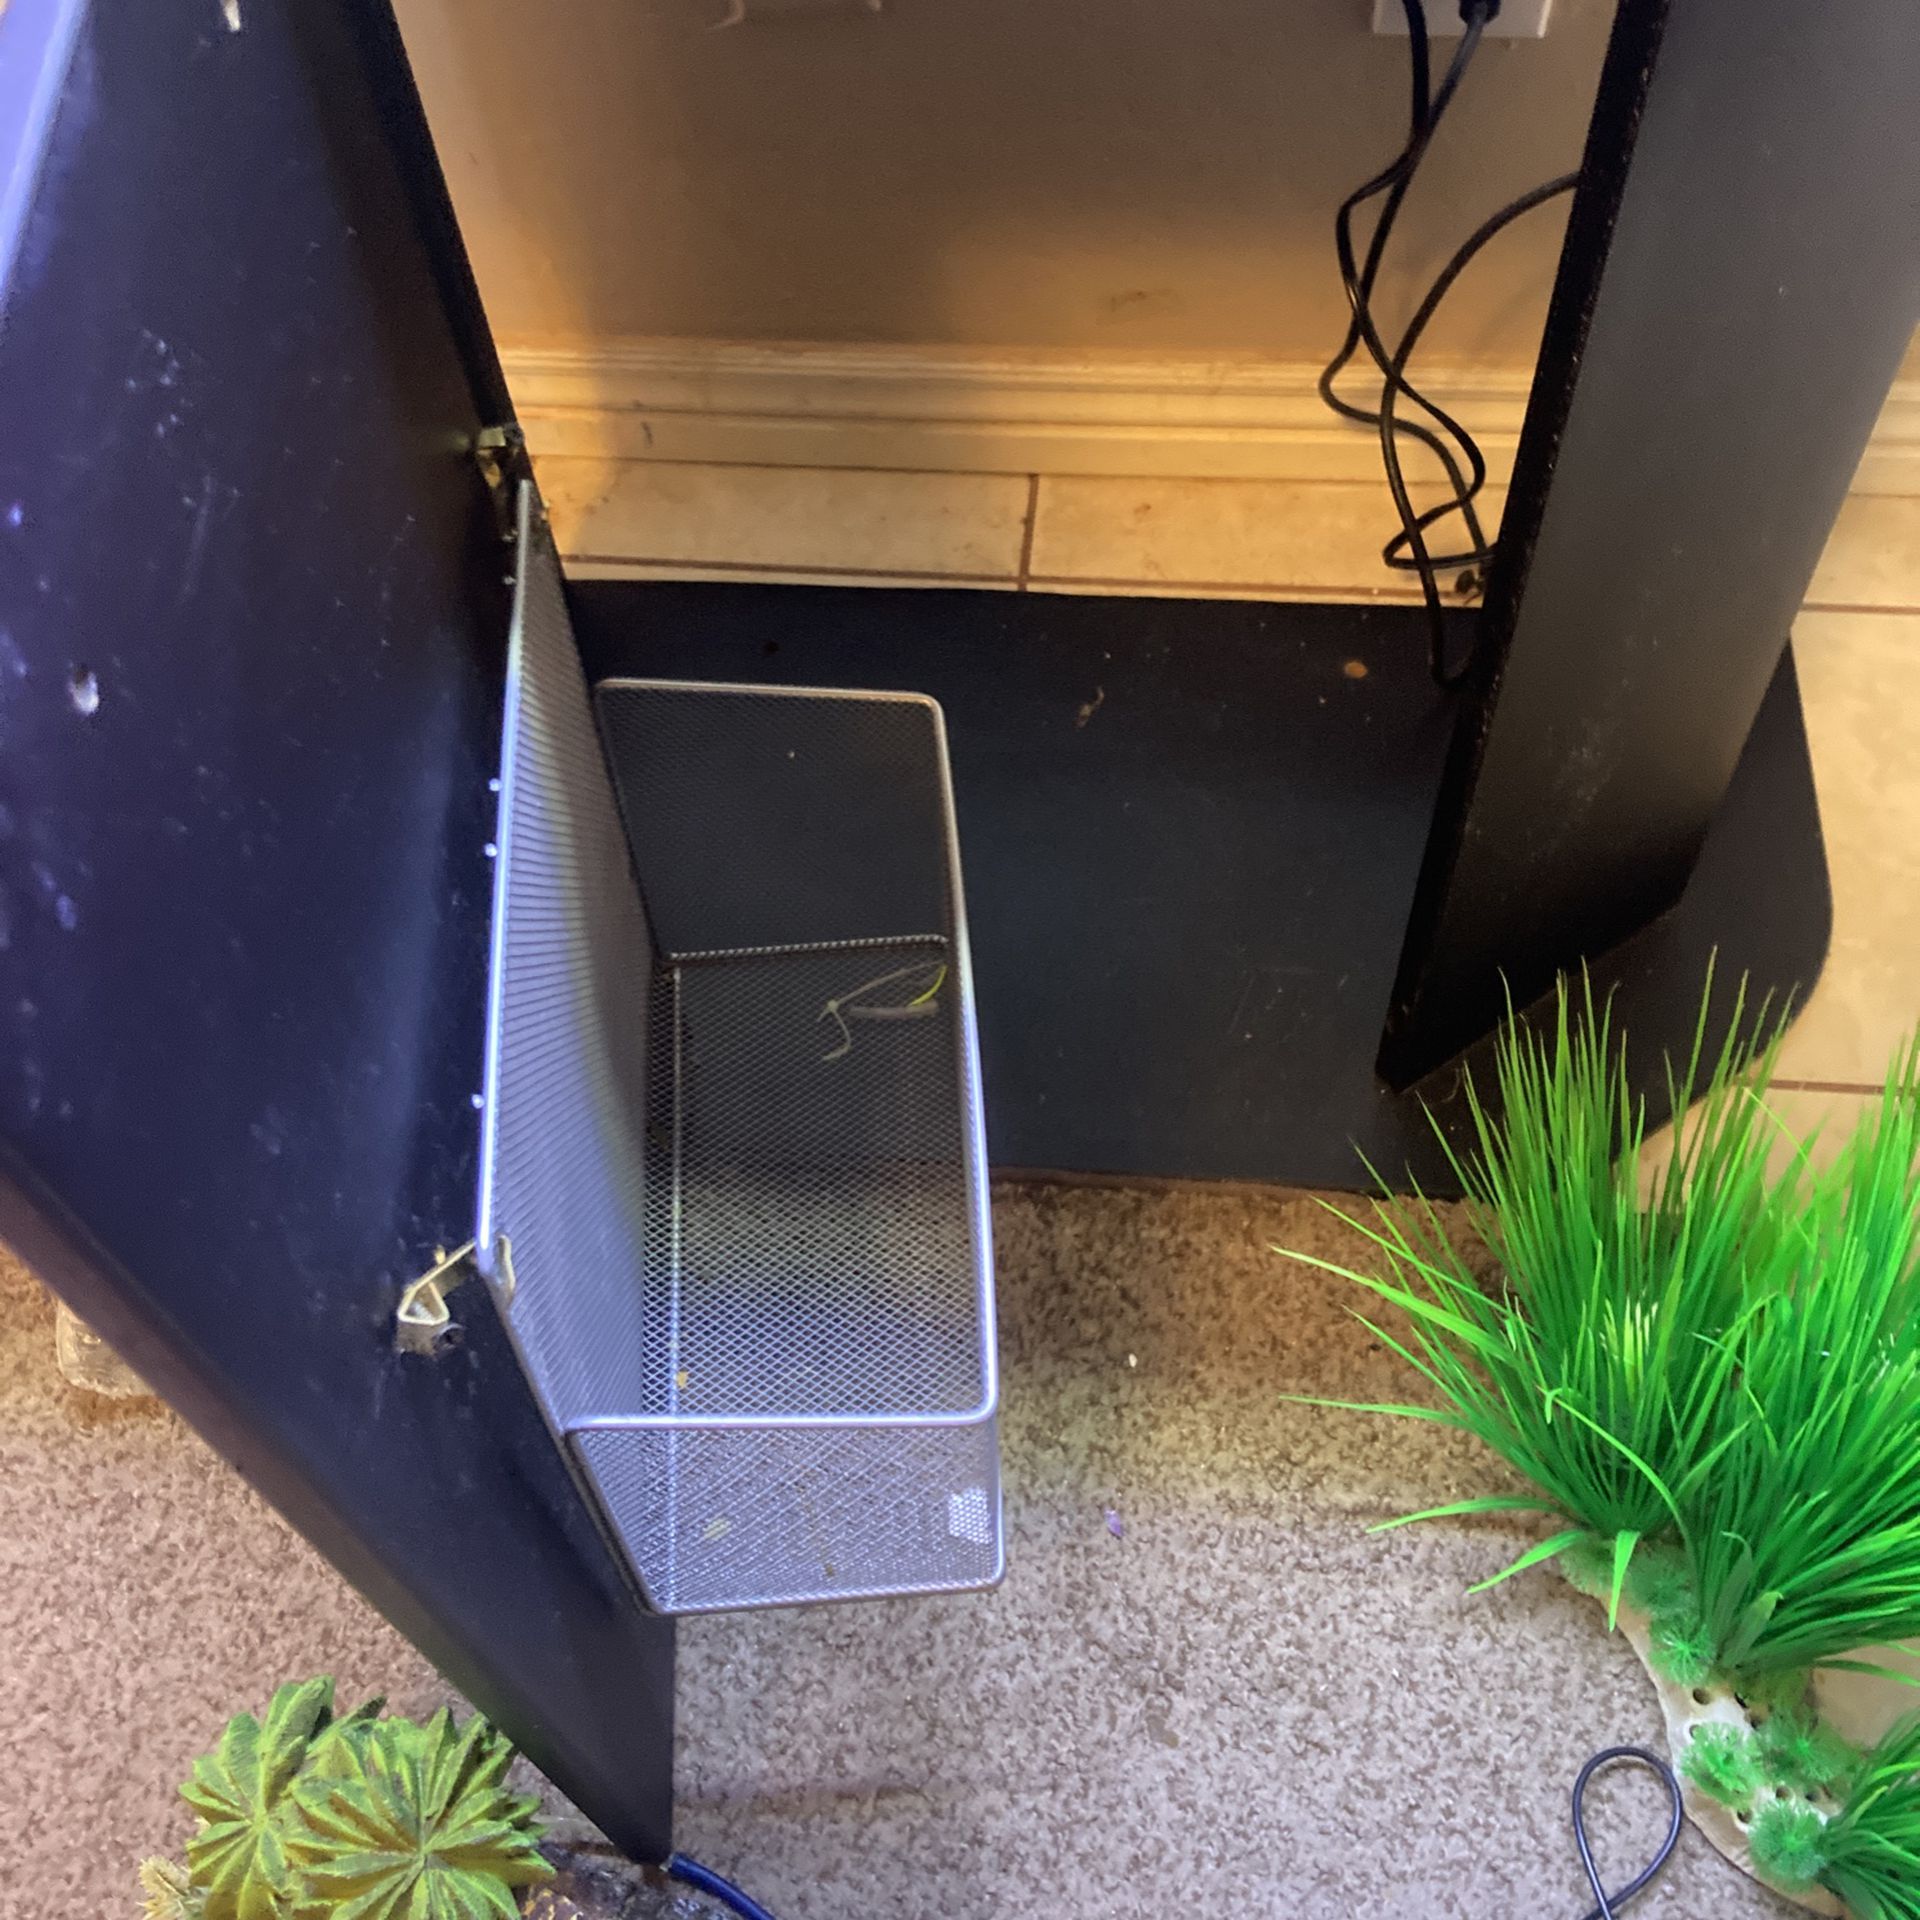 29 Gallon  Fish Aquarium  With Stand And Lots Of Needed Equipment  And Decorations 